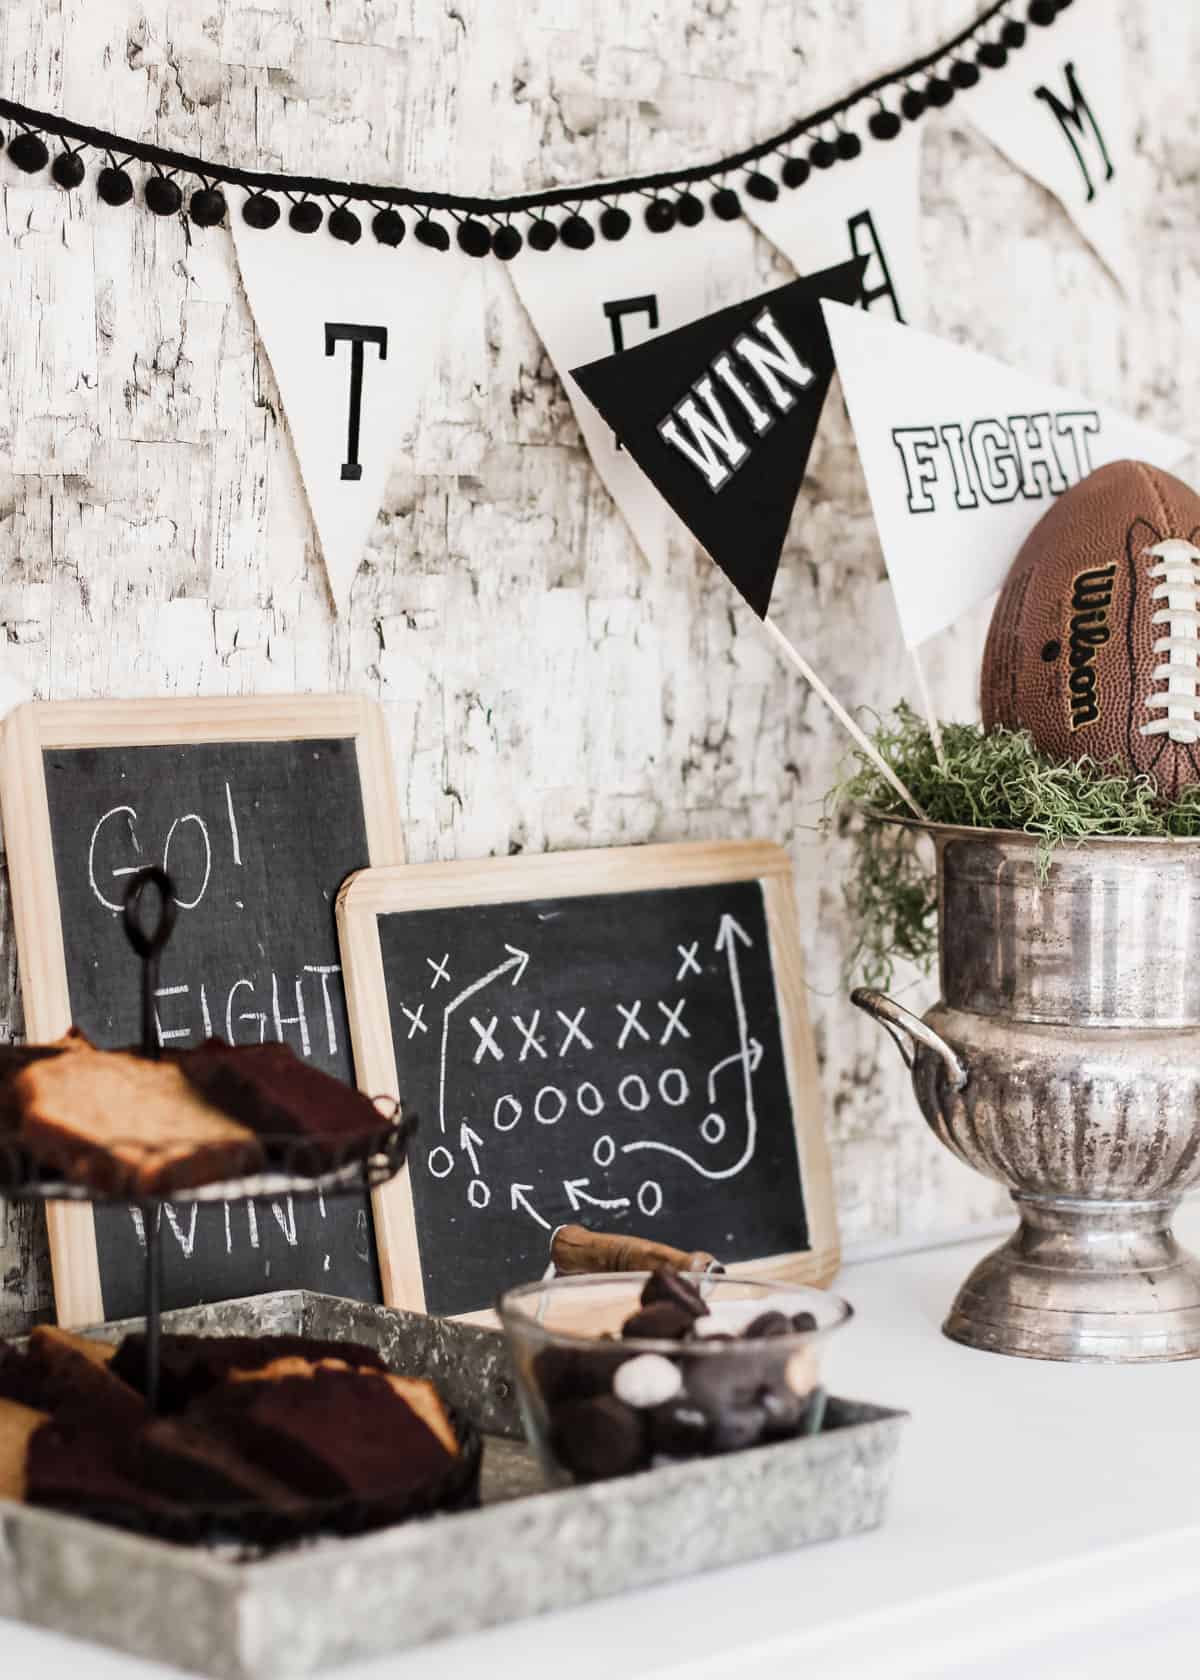 table with baked goods, chalkboards, and football trophy decor for a party.